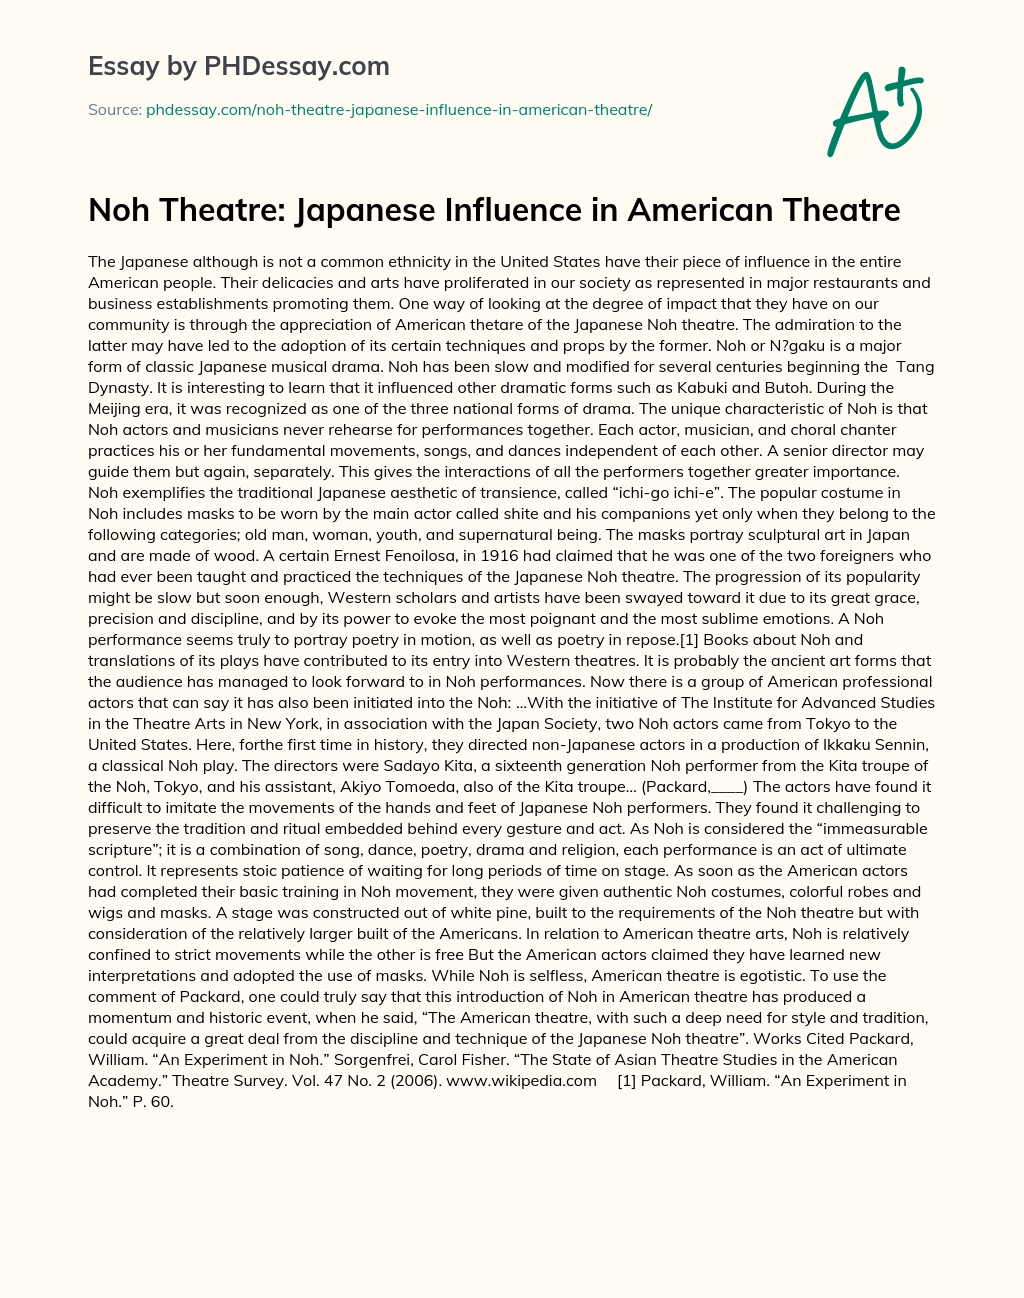 Japanese Influence in American Theatre essay